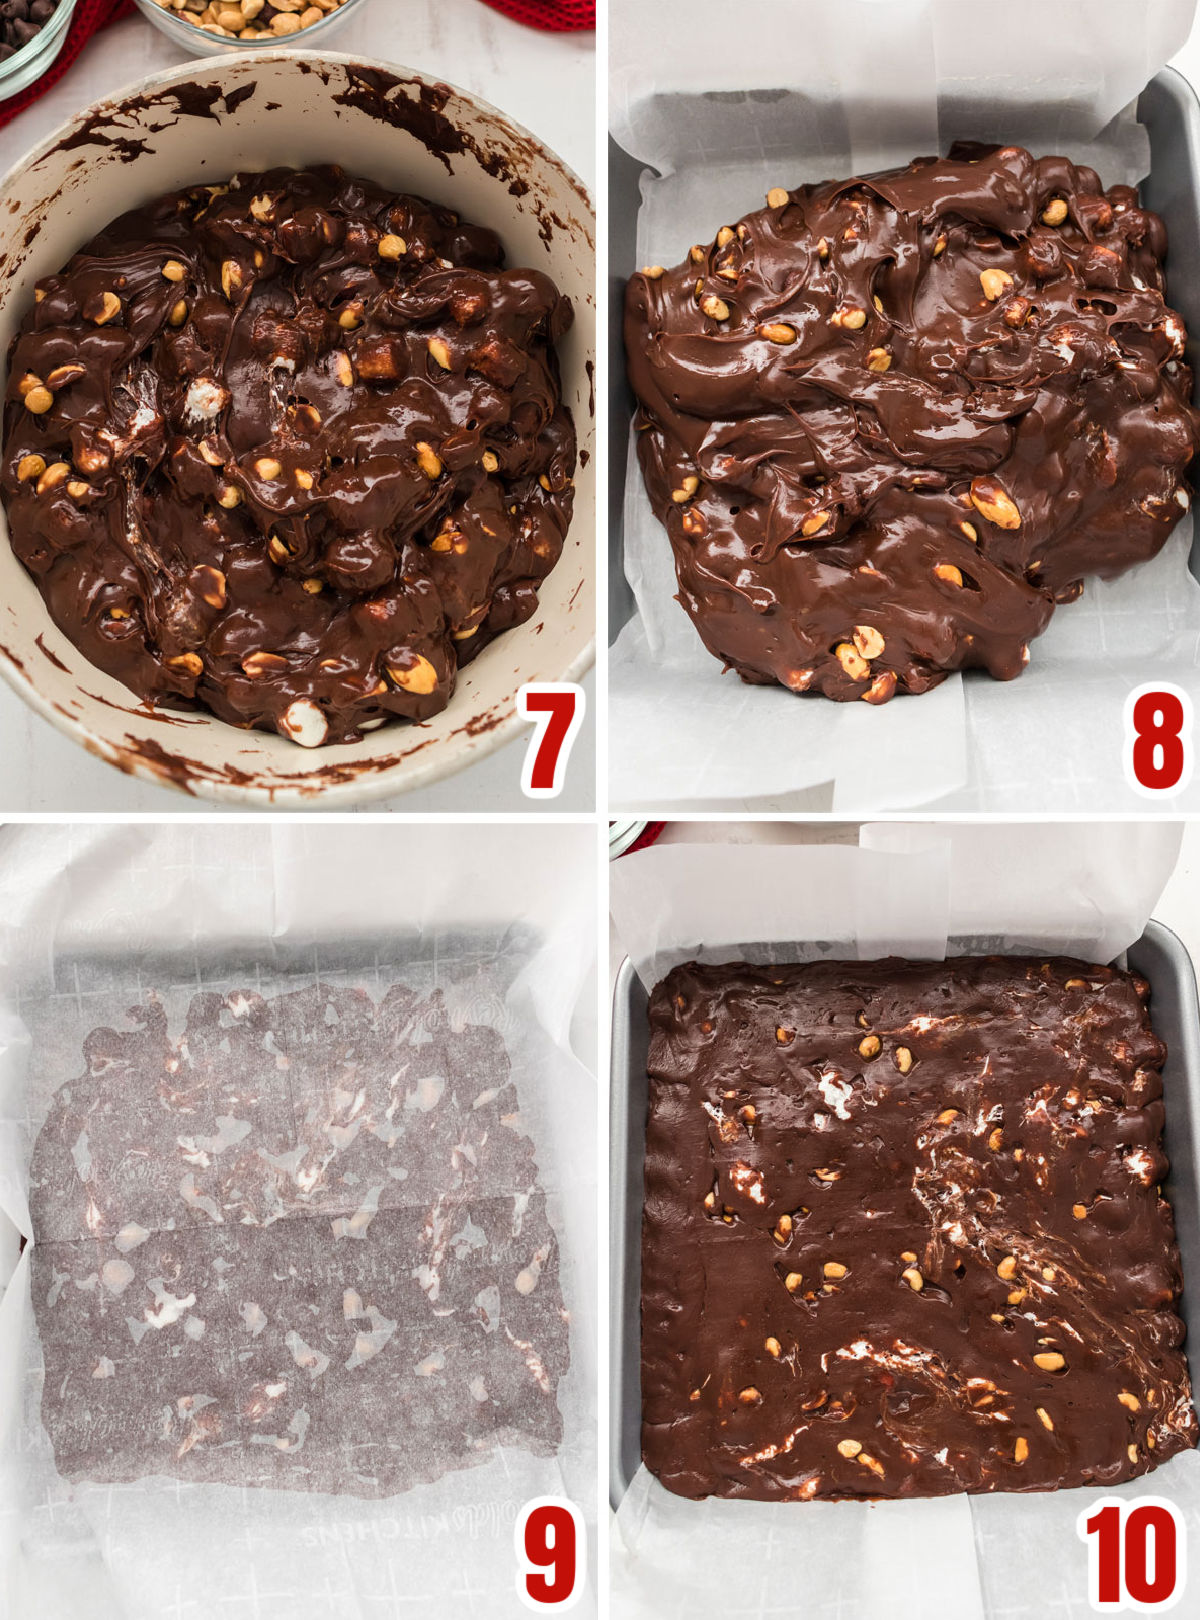 Collage image showing the steps for pouring the fudge mixture into an 8x8" pan for cooling.